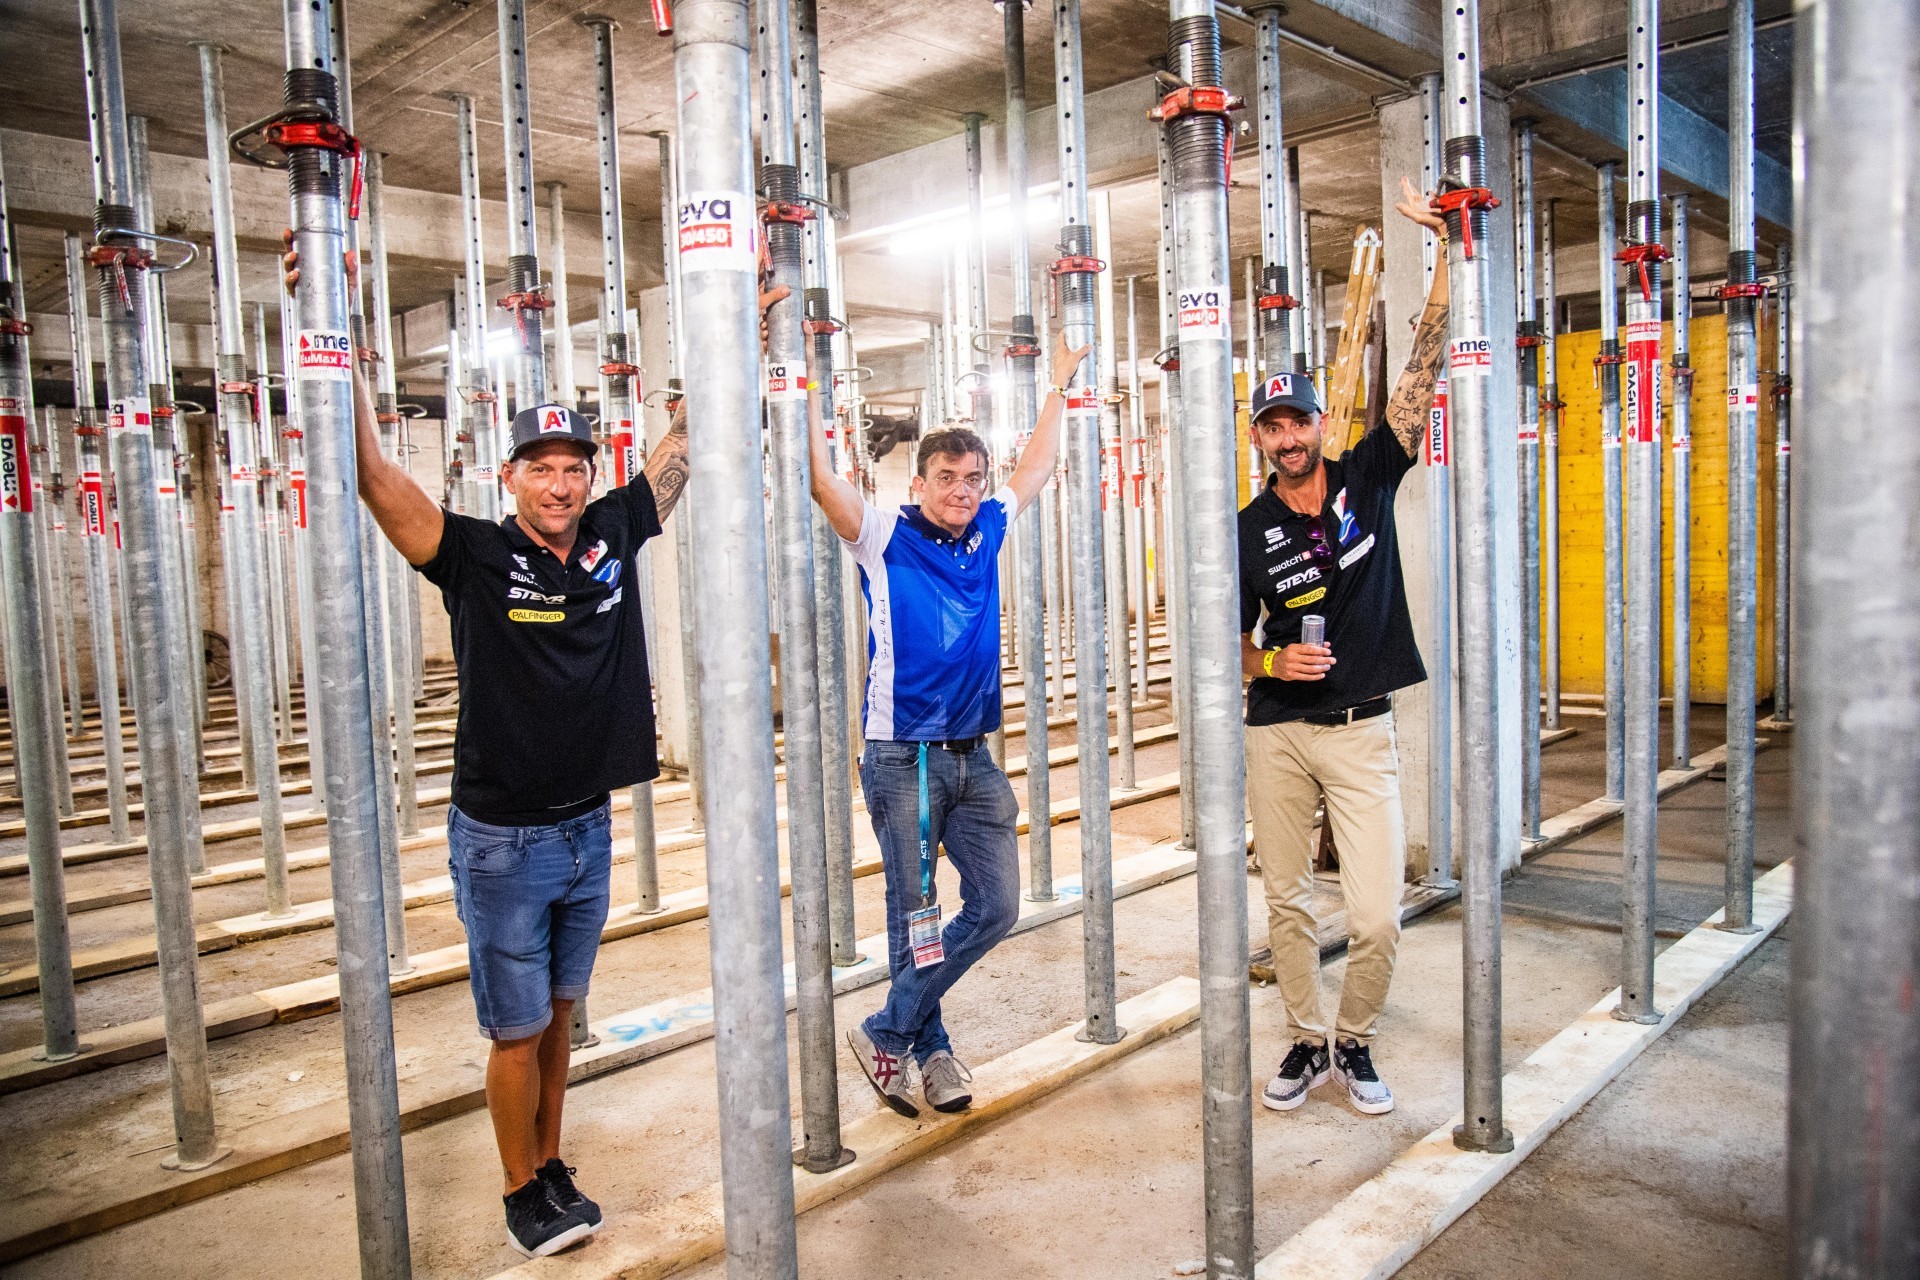 Horst, Jagerhofer and Doppler stand next to the steel poles that support the stadium